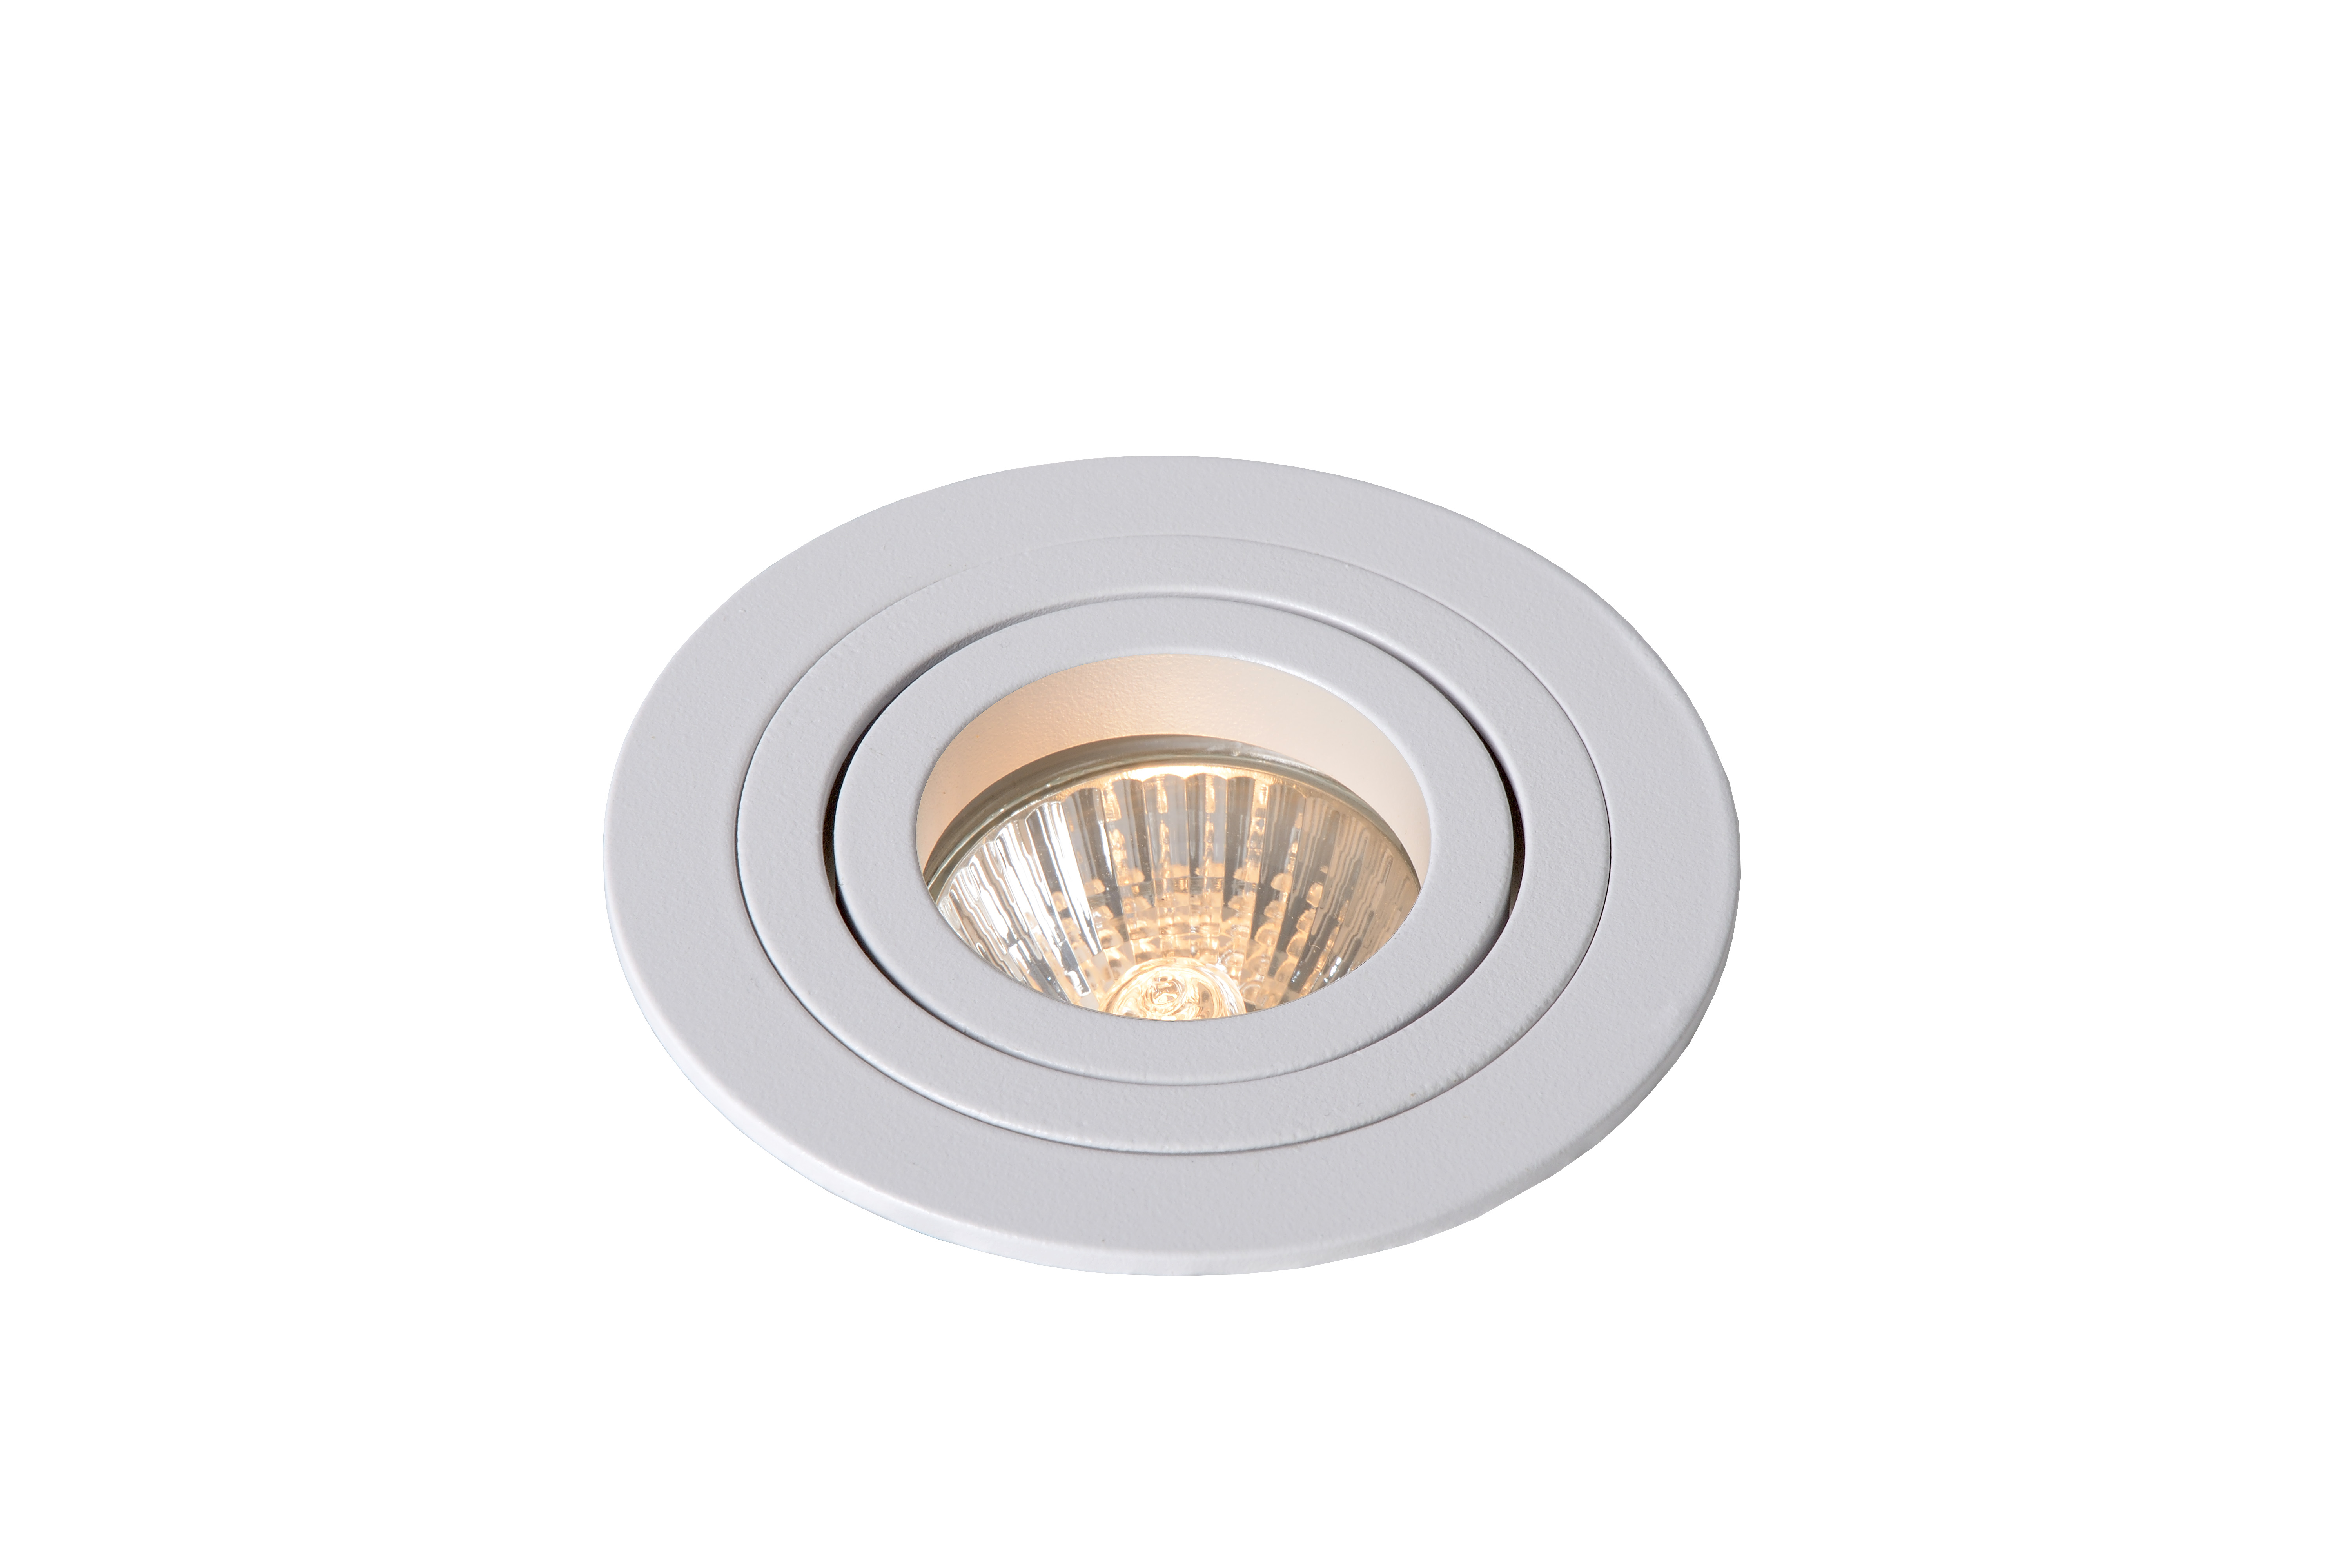 5 x White Fire Rated GU10 Downlight Tilting Ceiling Spotlight Recessed 